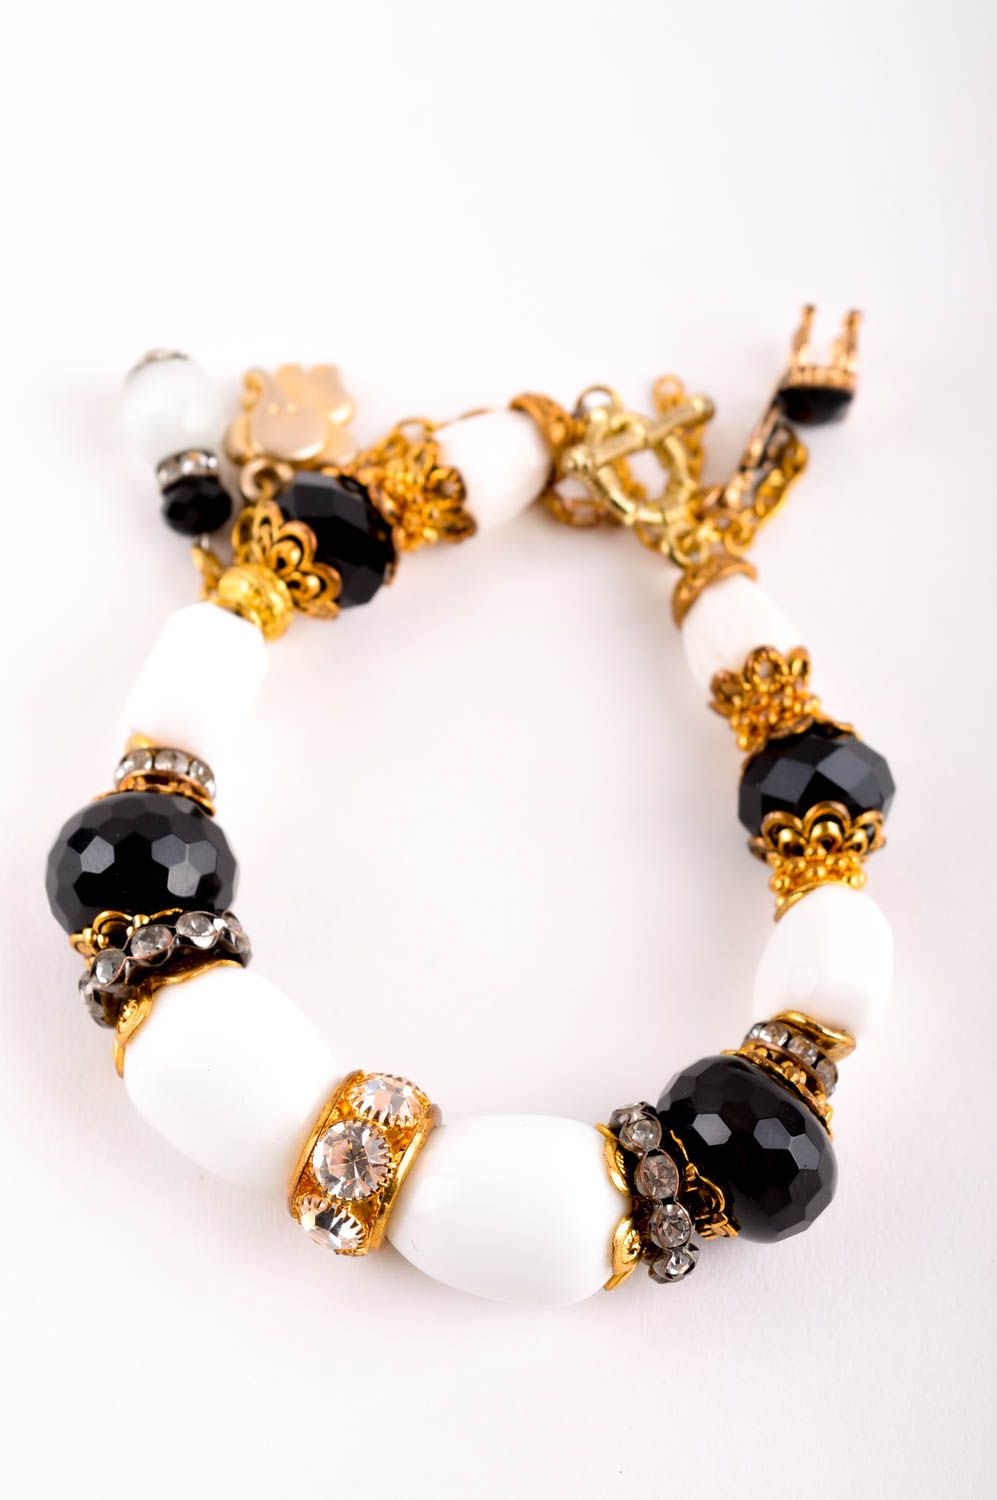 Handmade gemstone beaded bracelet with black and white beads and gold color charms for girls photo 2